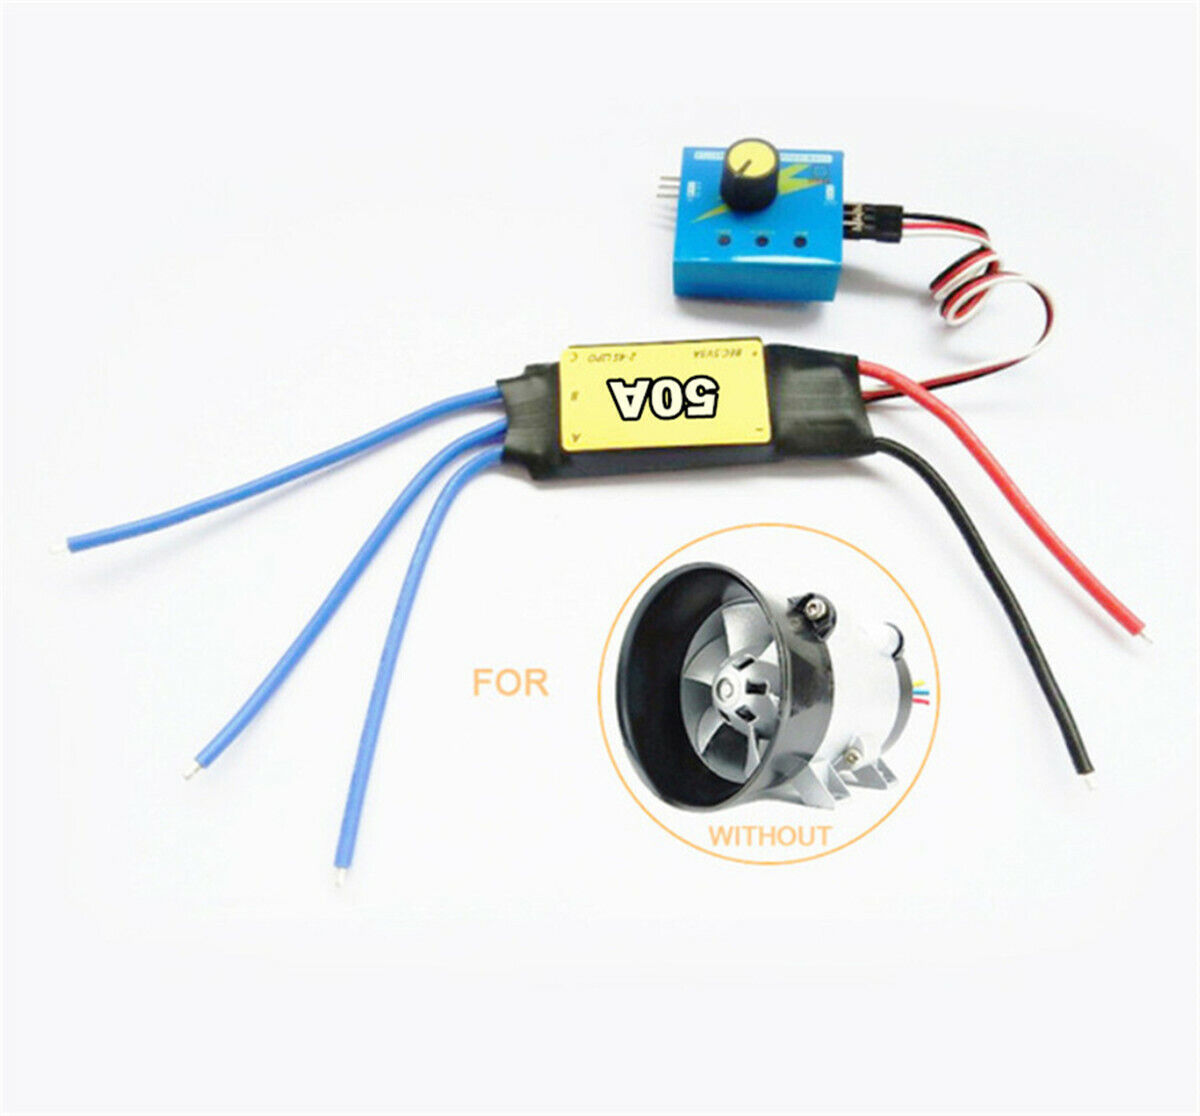 12V Max 600W Controller for Car Electric Turbine Power Turbo Charger Tan Air Fan